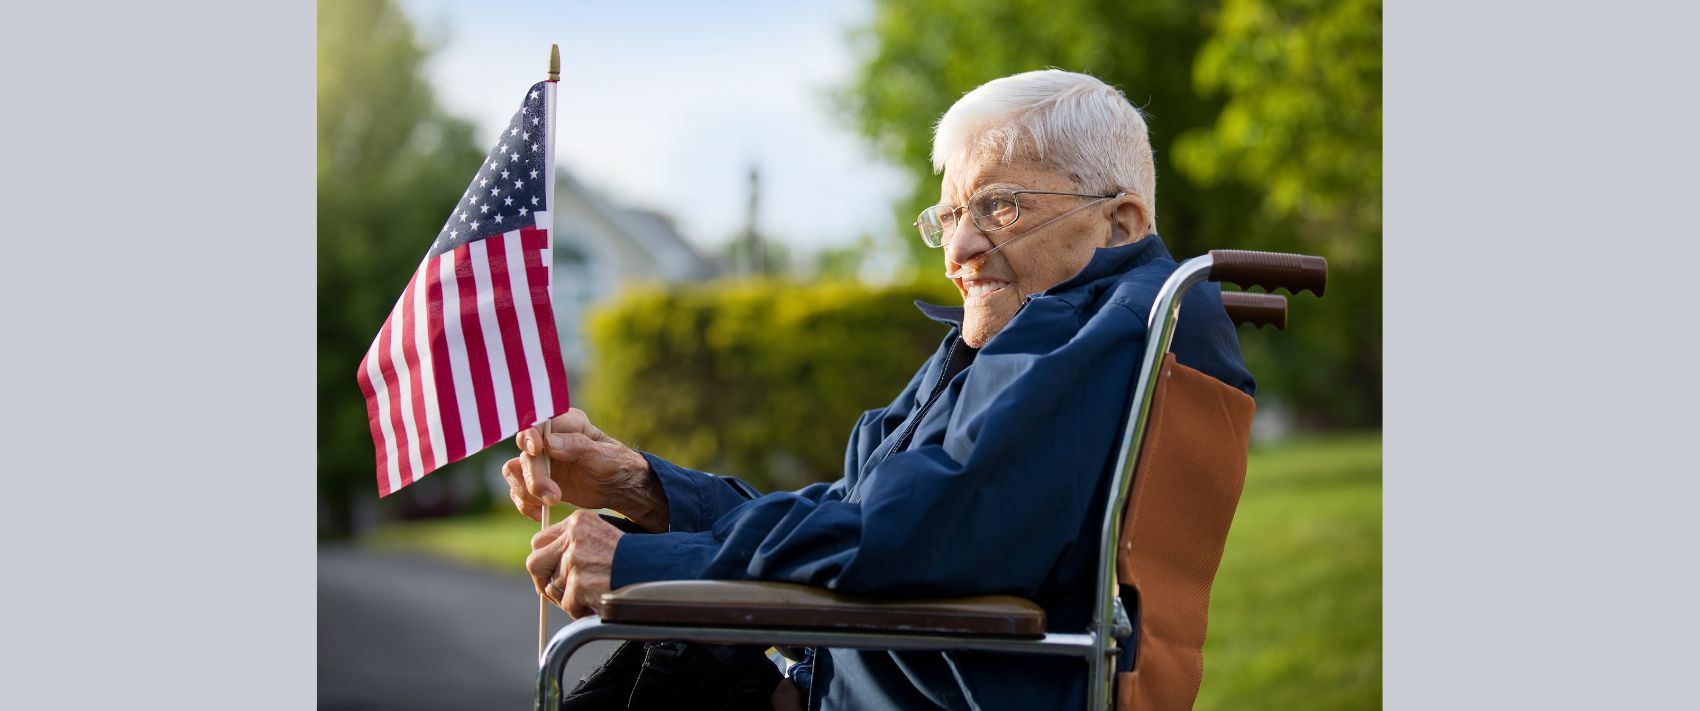 92 years old veteran sitting on his wheelchair holding an American flag